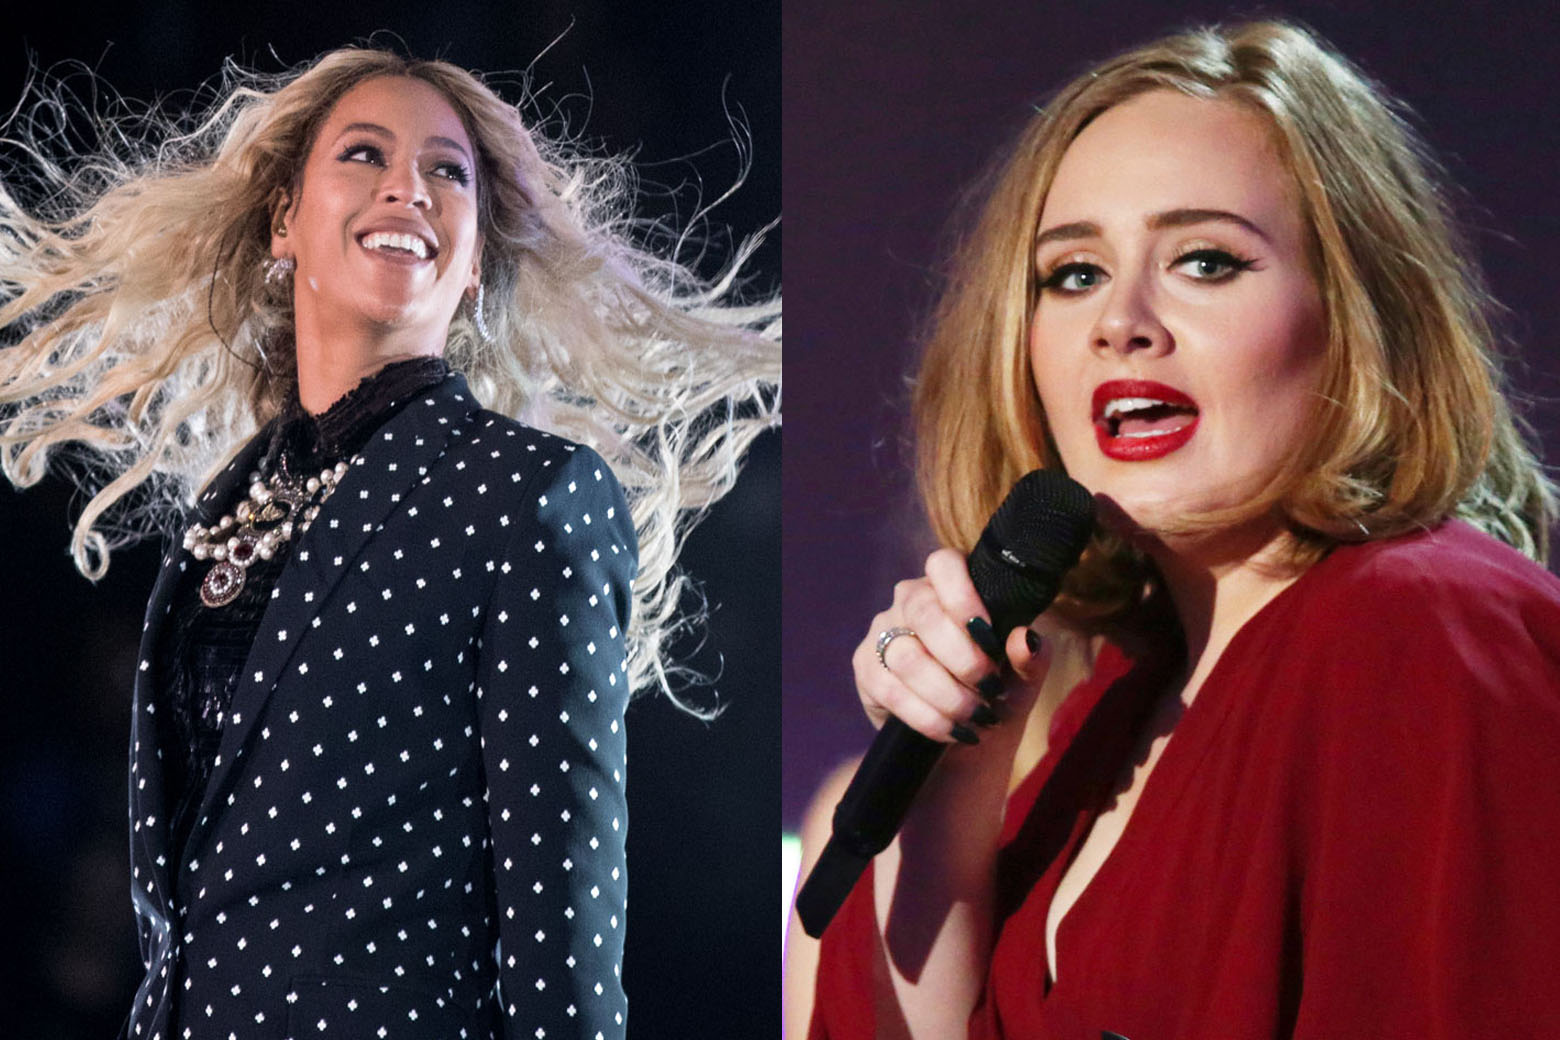 Beyoncé and Adele are leading contenders for Album of the Year heading into the Grammys. (WTOP collage via AP)